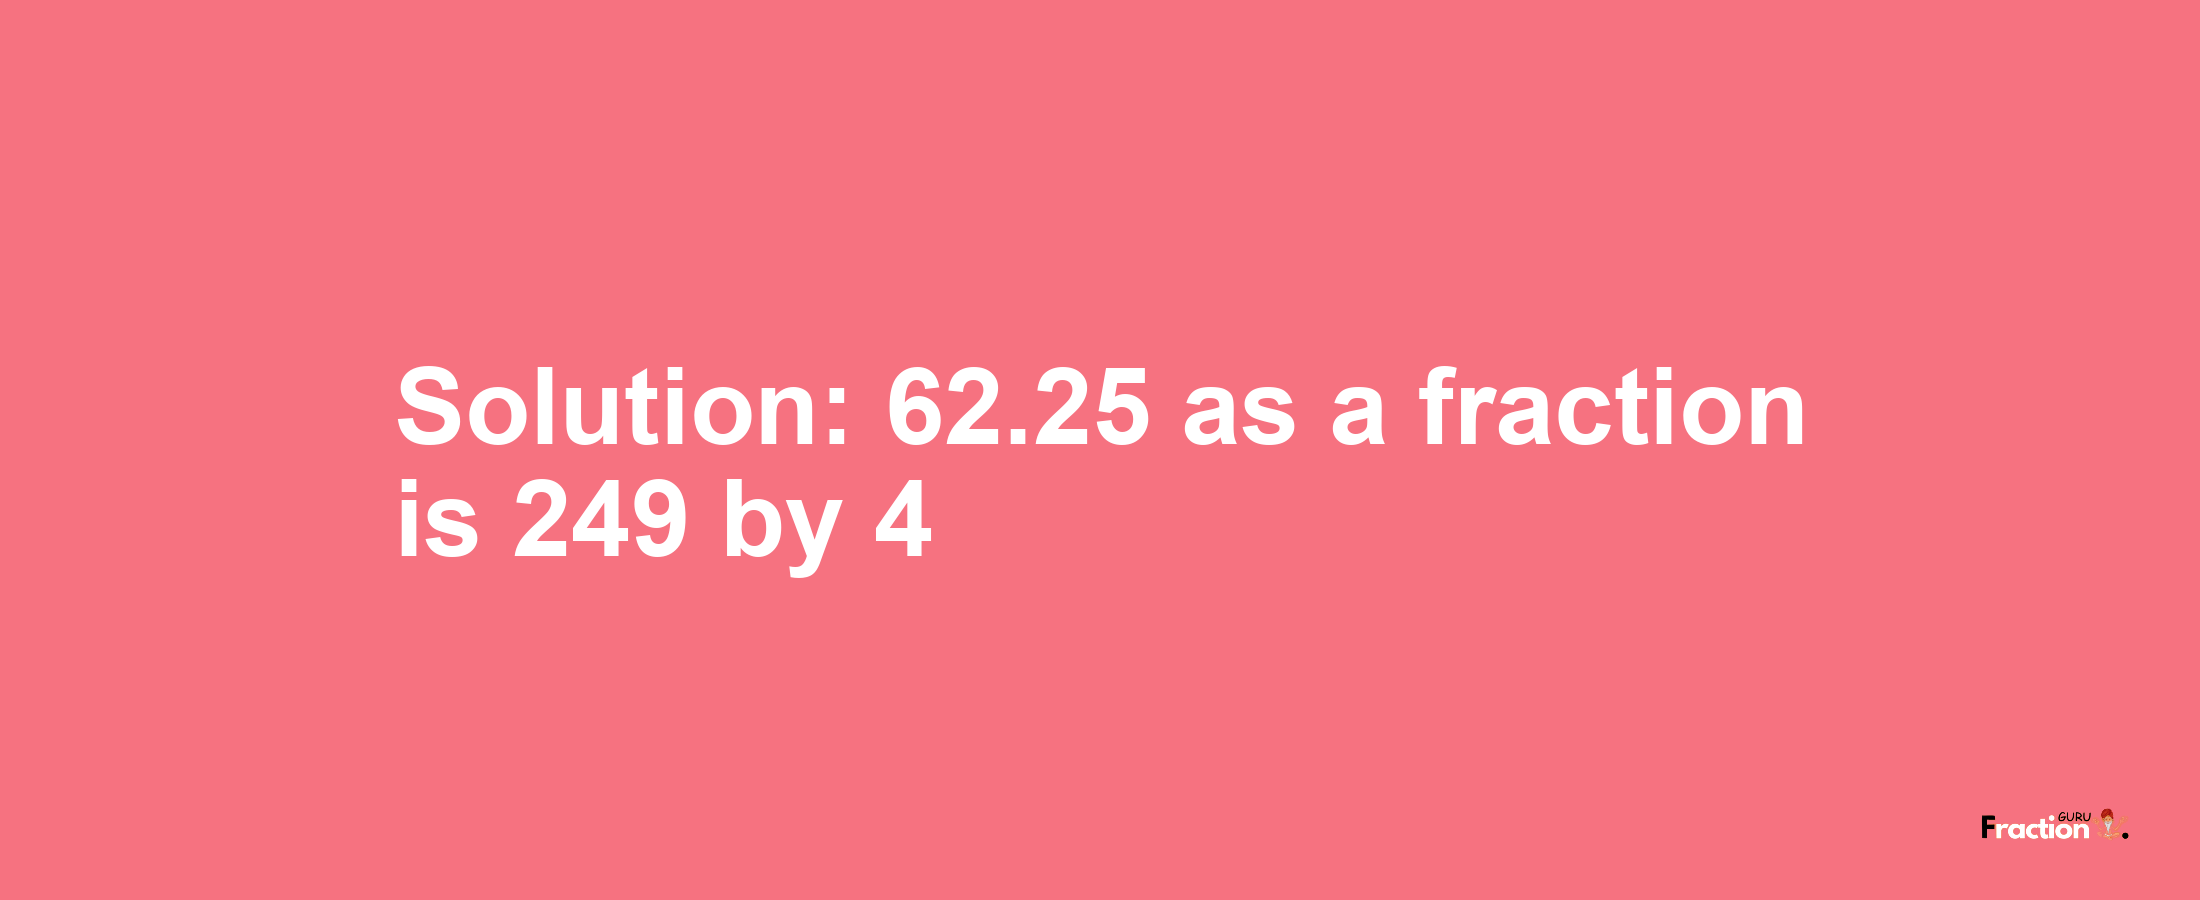 Solution:62.25 as a fraction is 249/4